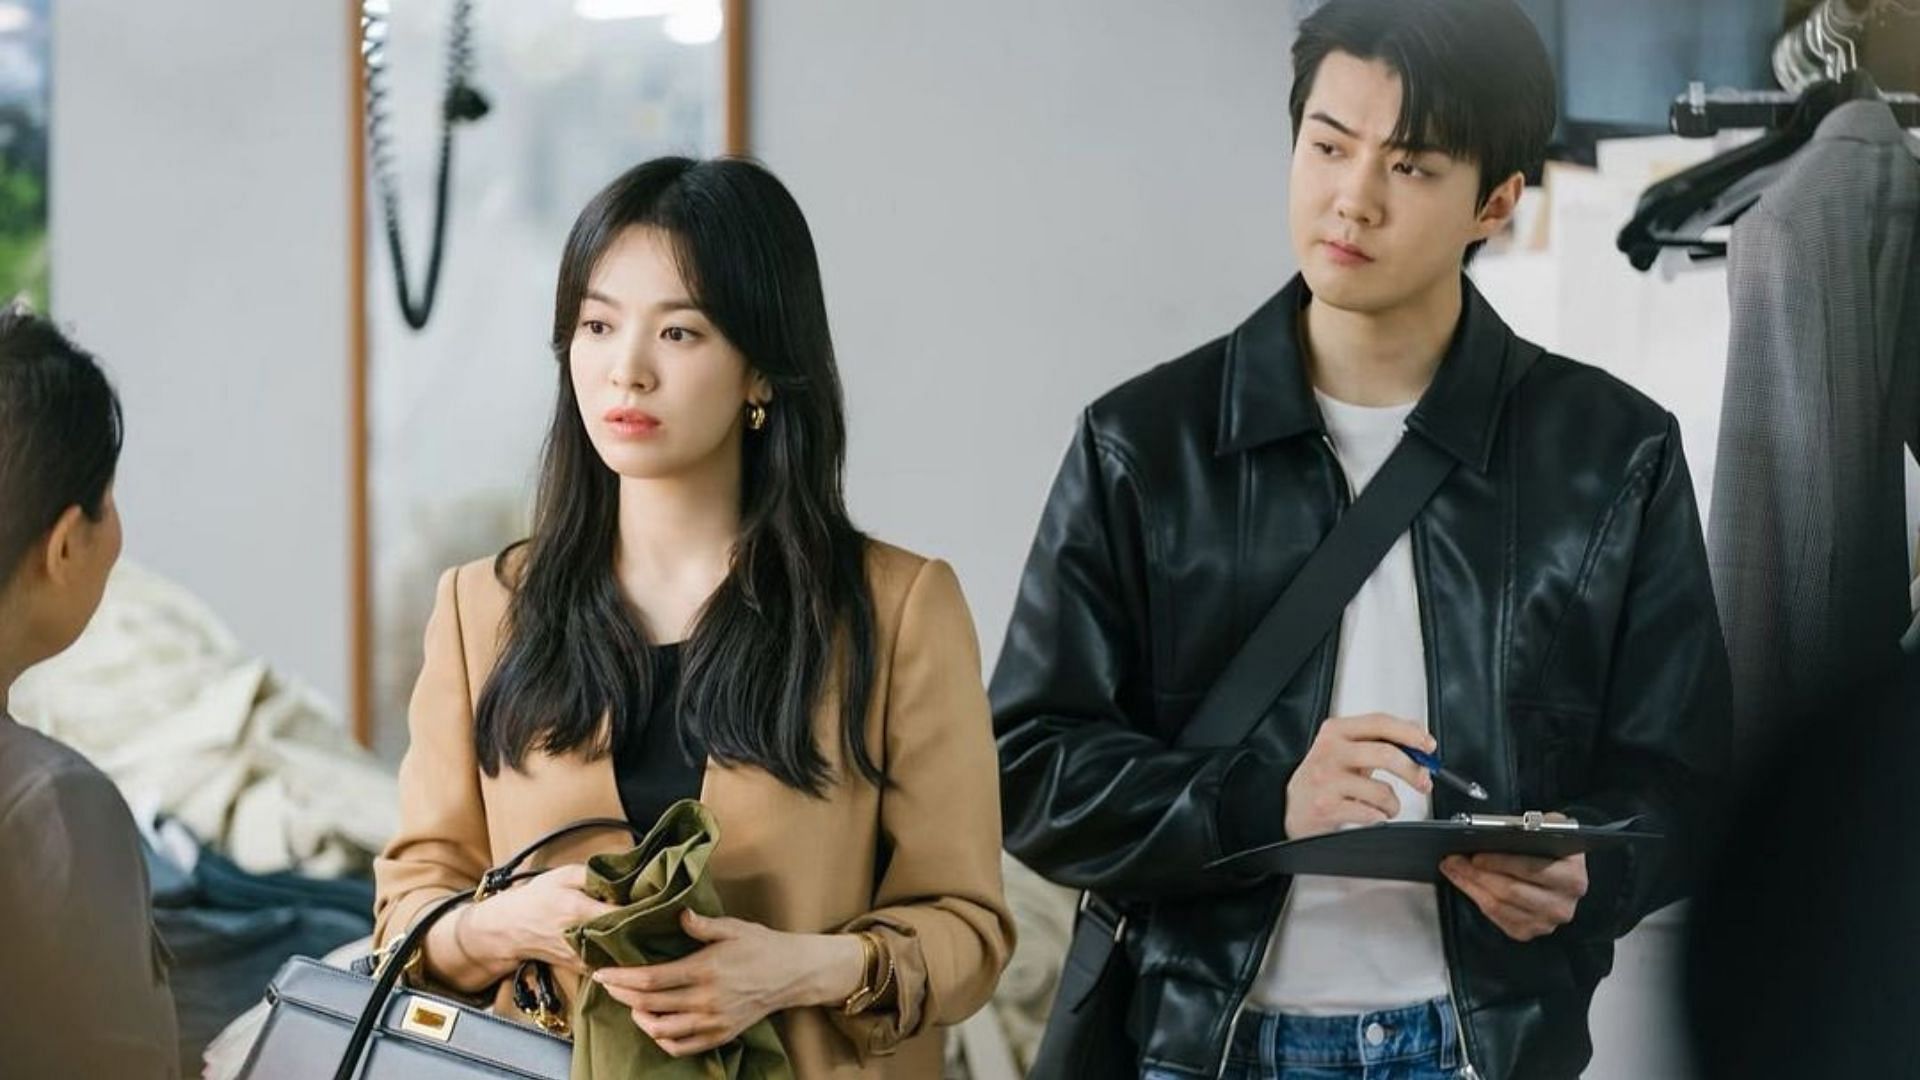 A still of Song Hye Kyo and Sehun in Now, We Are Breaking Up episode 5 (Image via sbsdrama.official/Instagram)